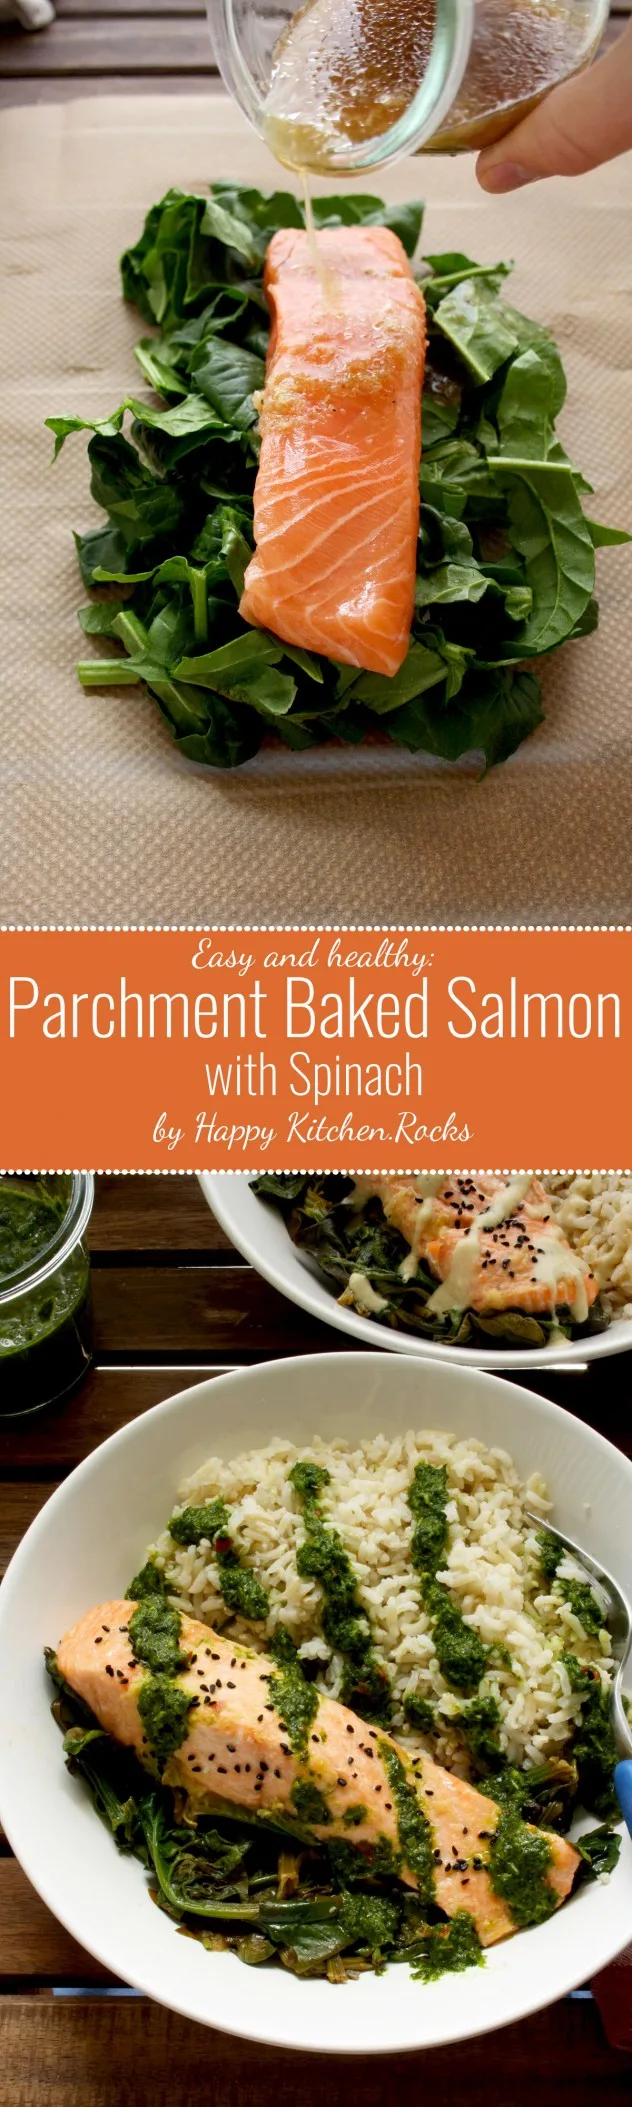 Easy and healthy parchment salmon baked with spinach and ginger-garlic sauce: a 20-min recipe of a delicious, quick and nutritious go-to weeknight dinner. Gluten free, low carb, low fat.